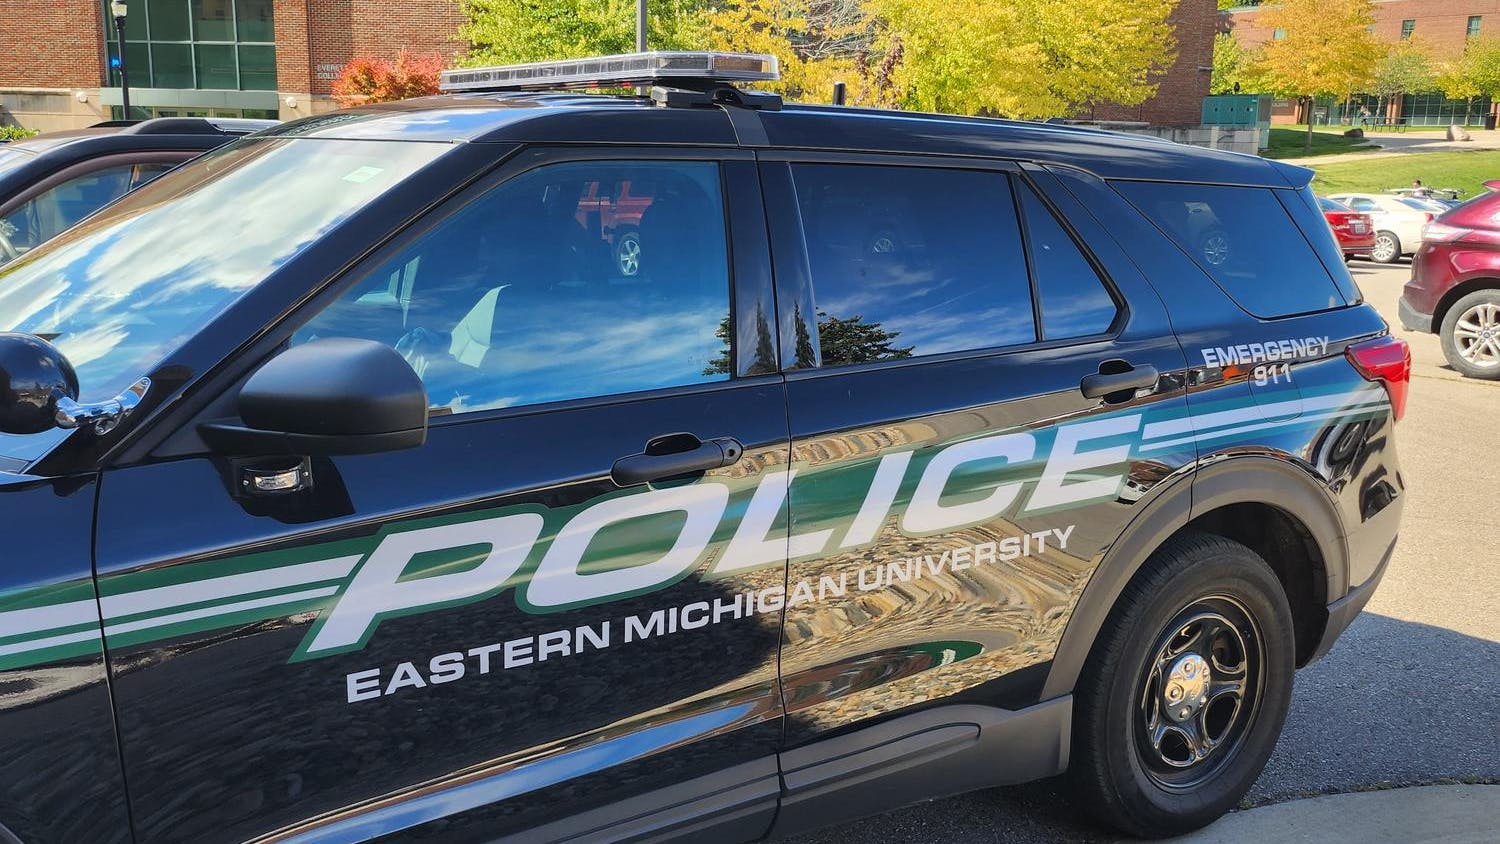 A police-labeled vehicle used by the Eastern Michigan University Department of Public Safety is parked on campus.